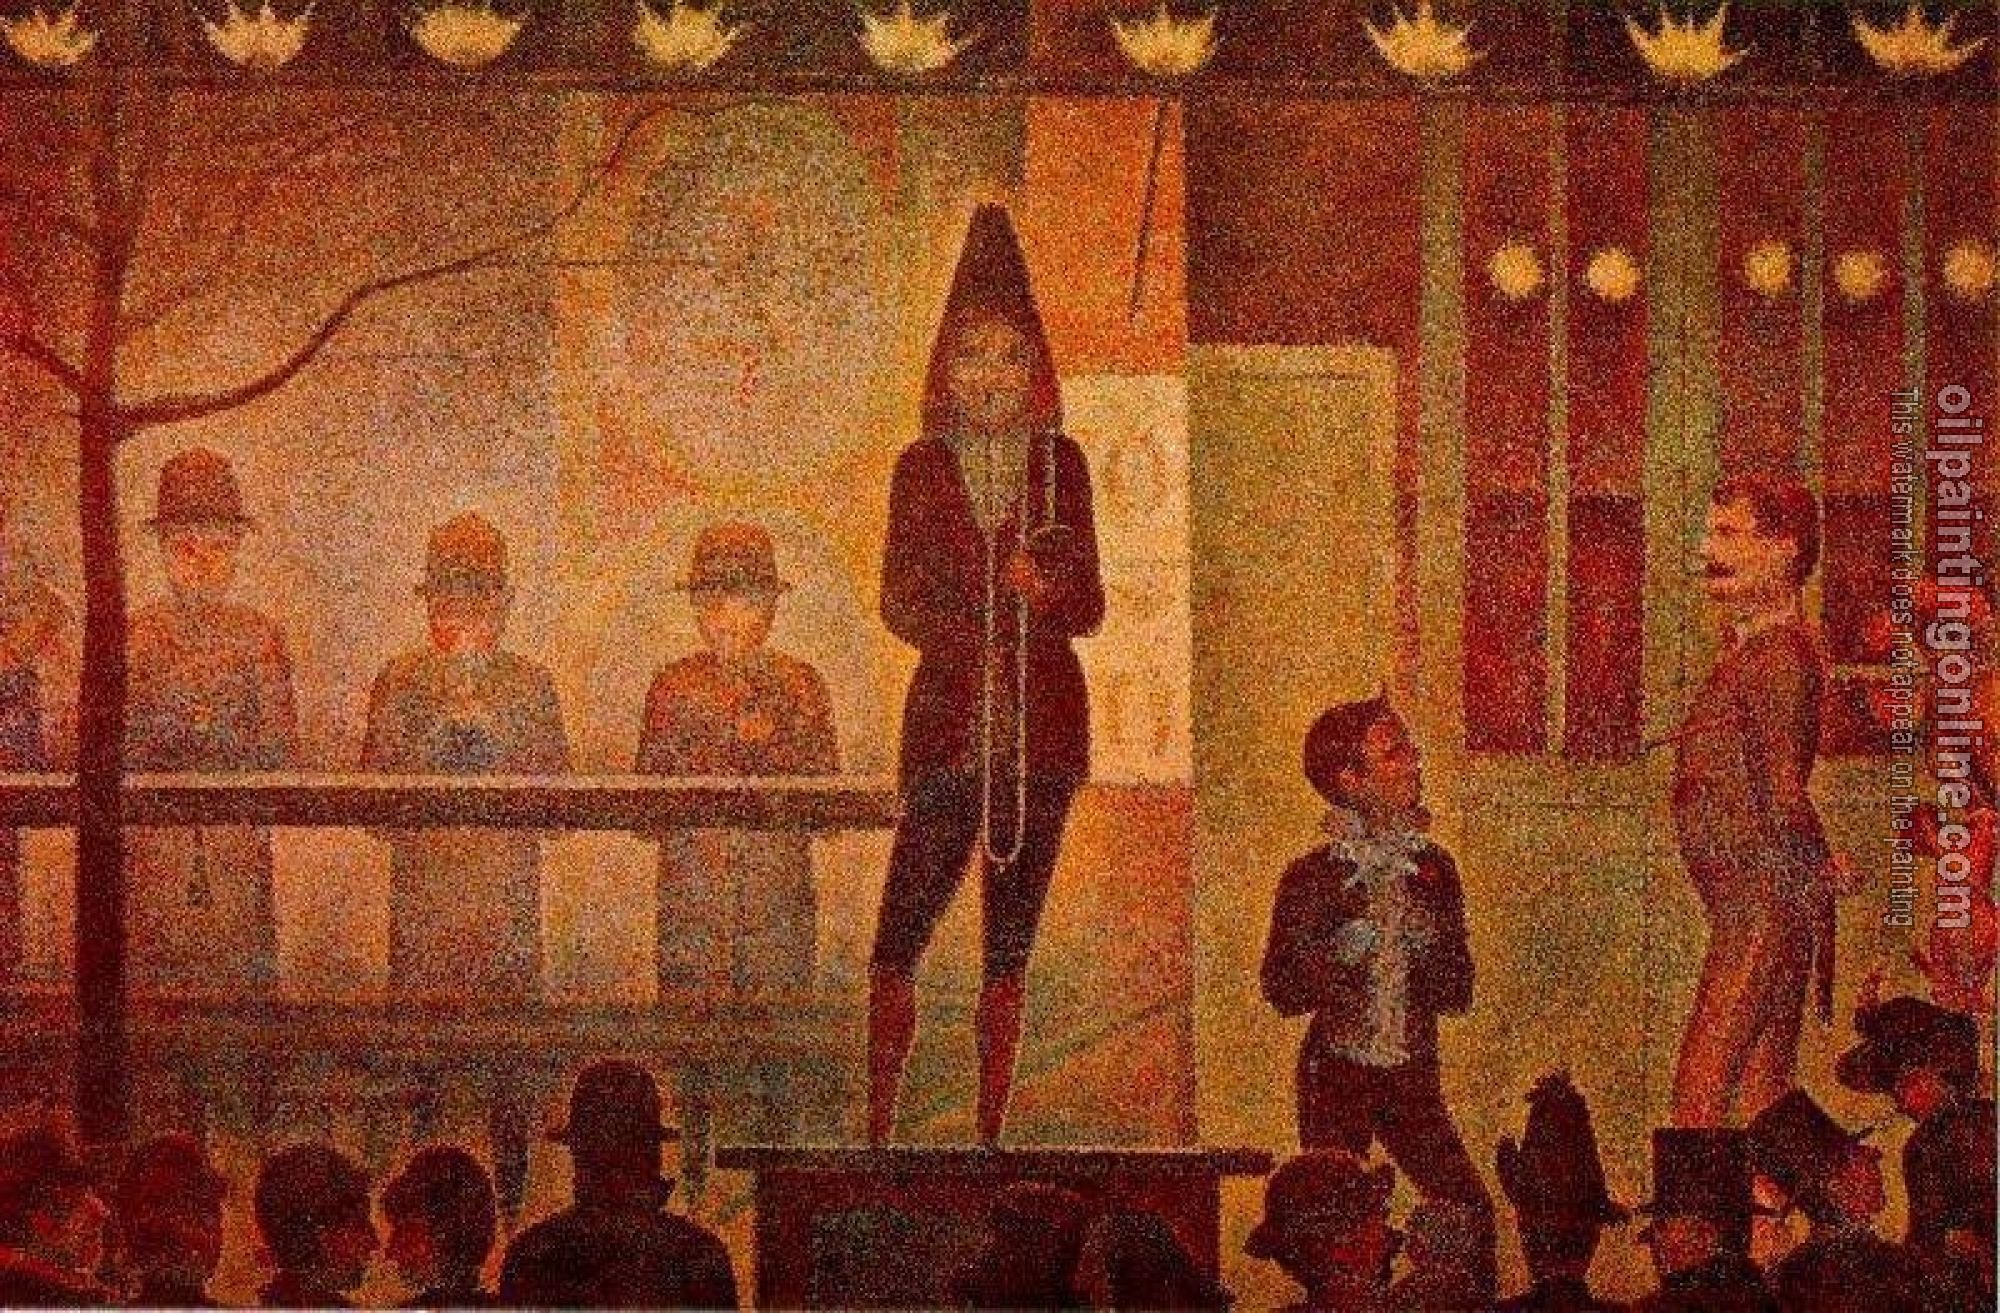 Seurat, Georges - Invitation to the Sideshow